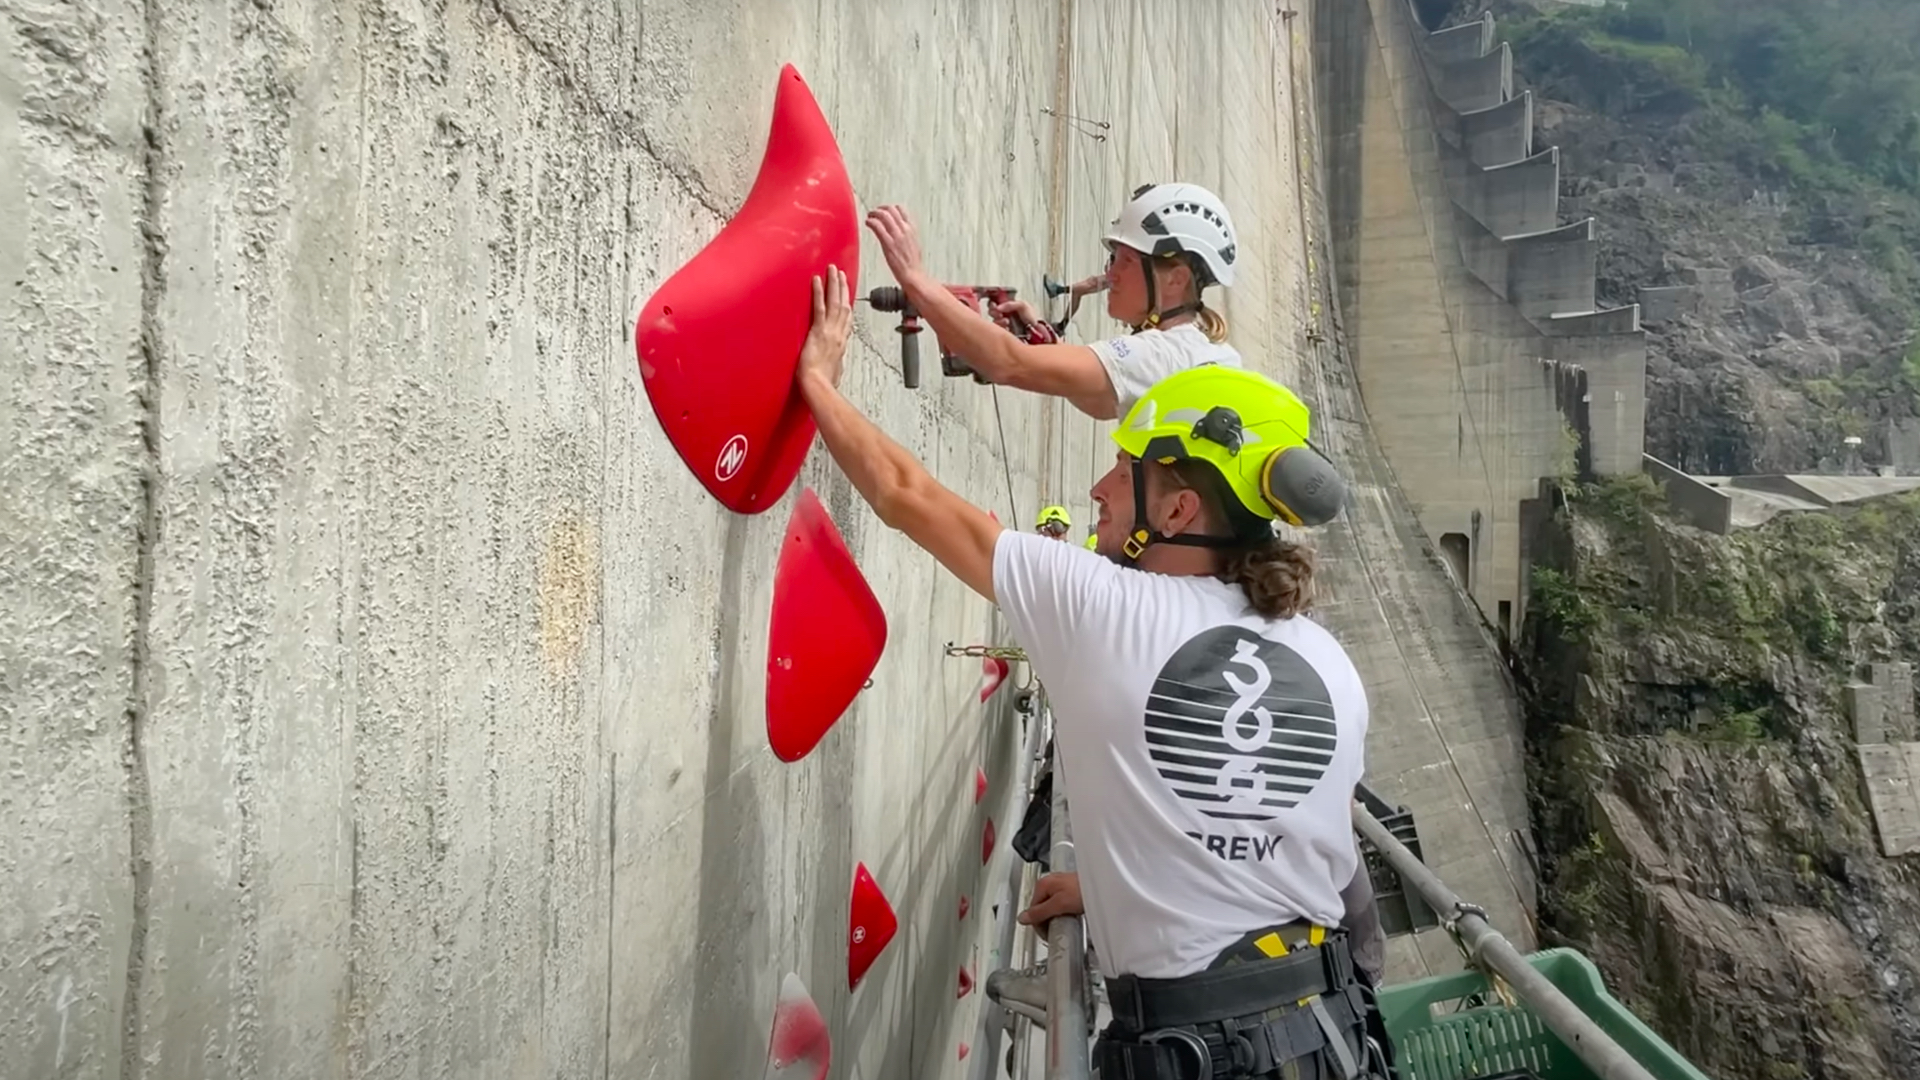 Watch workers building the Red Bull Dual Ascent climbing route on a ...